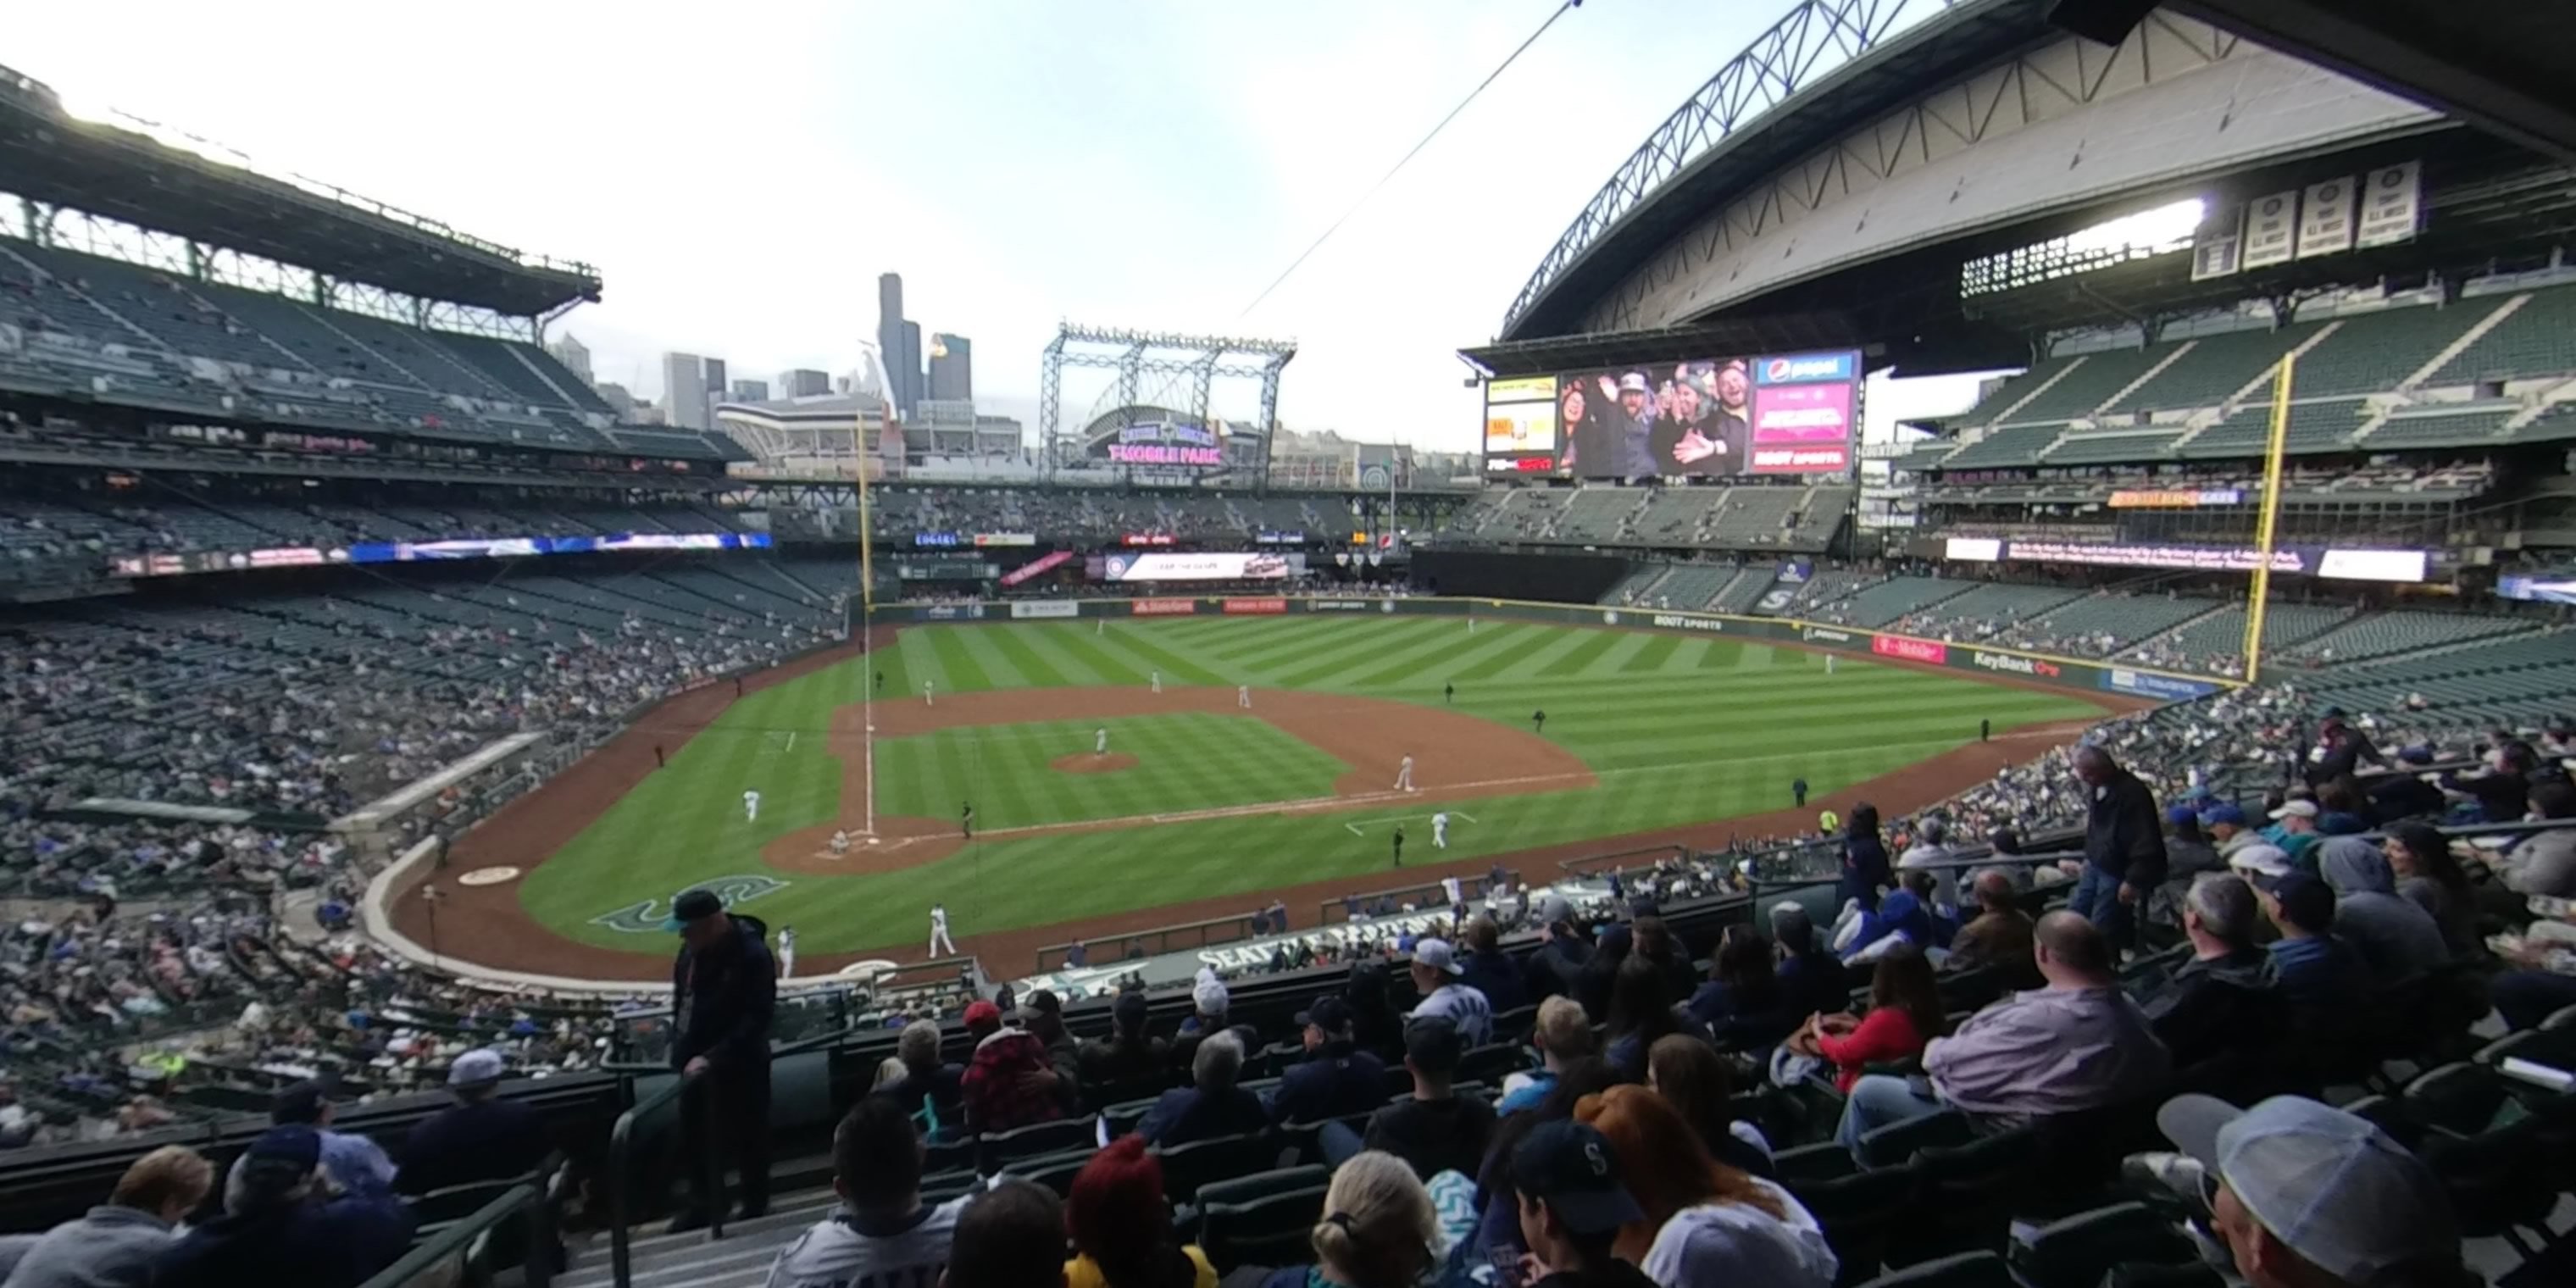 section 226 panoramic seat view  for baseball - t-mobile park